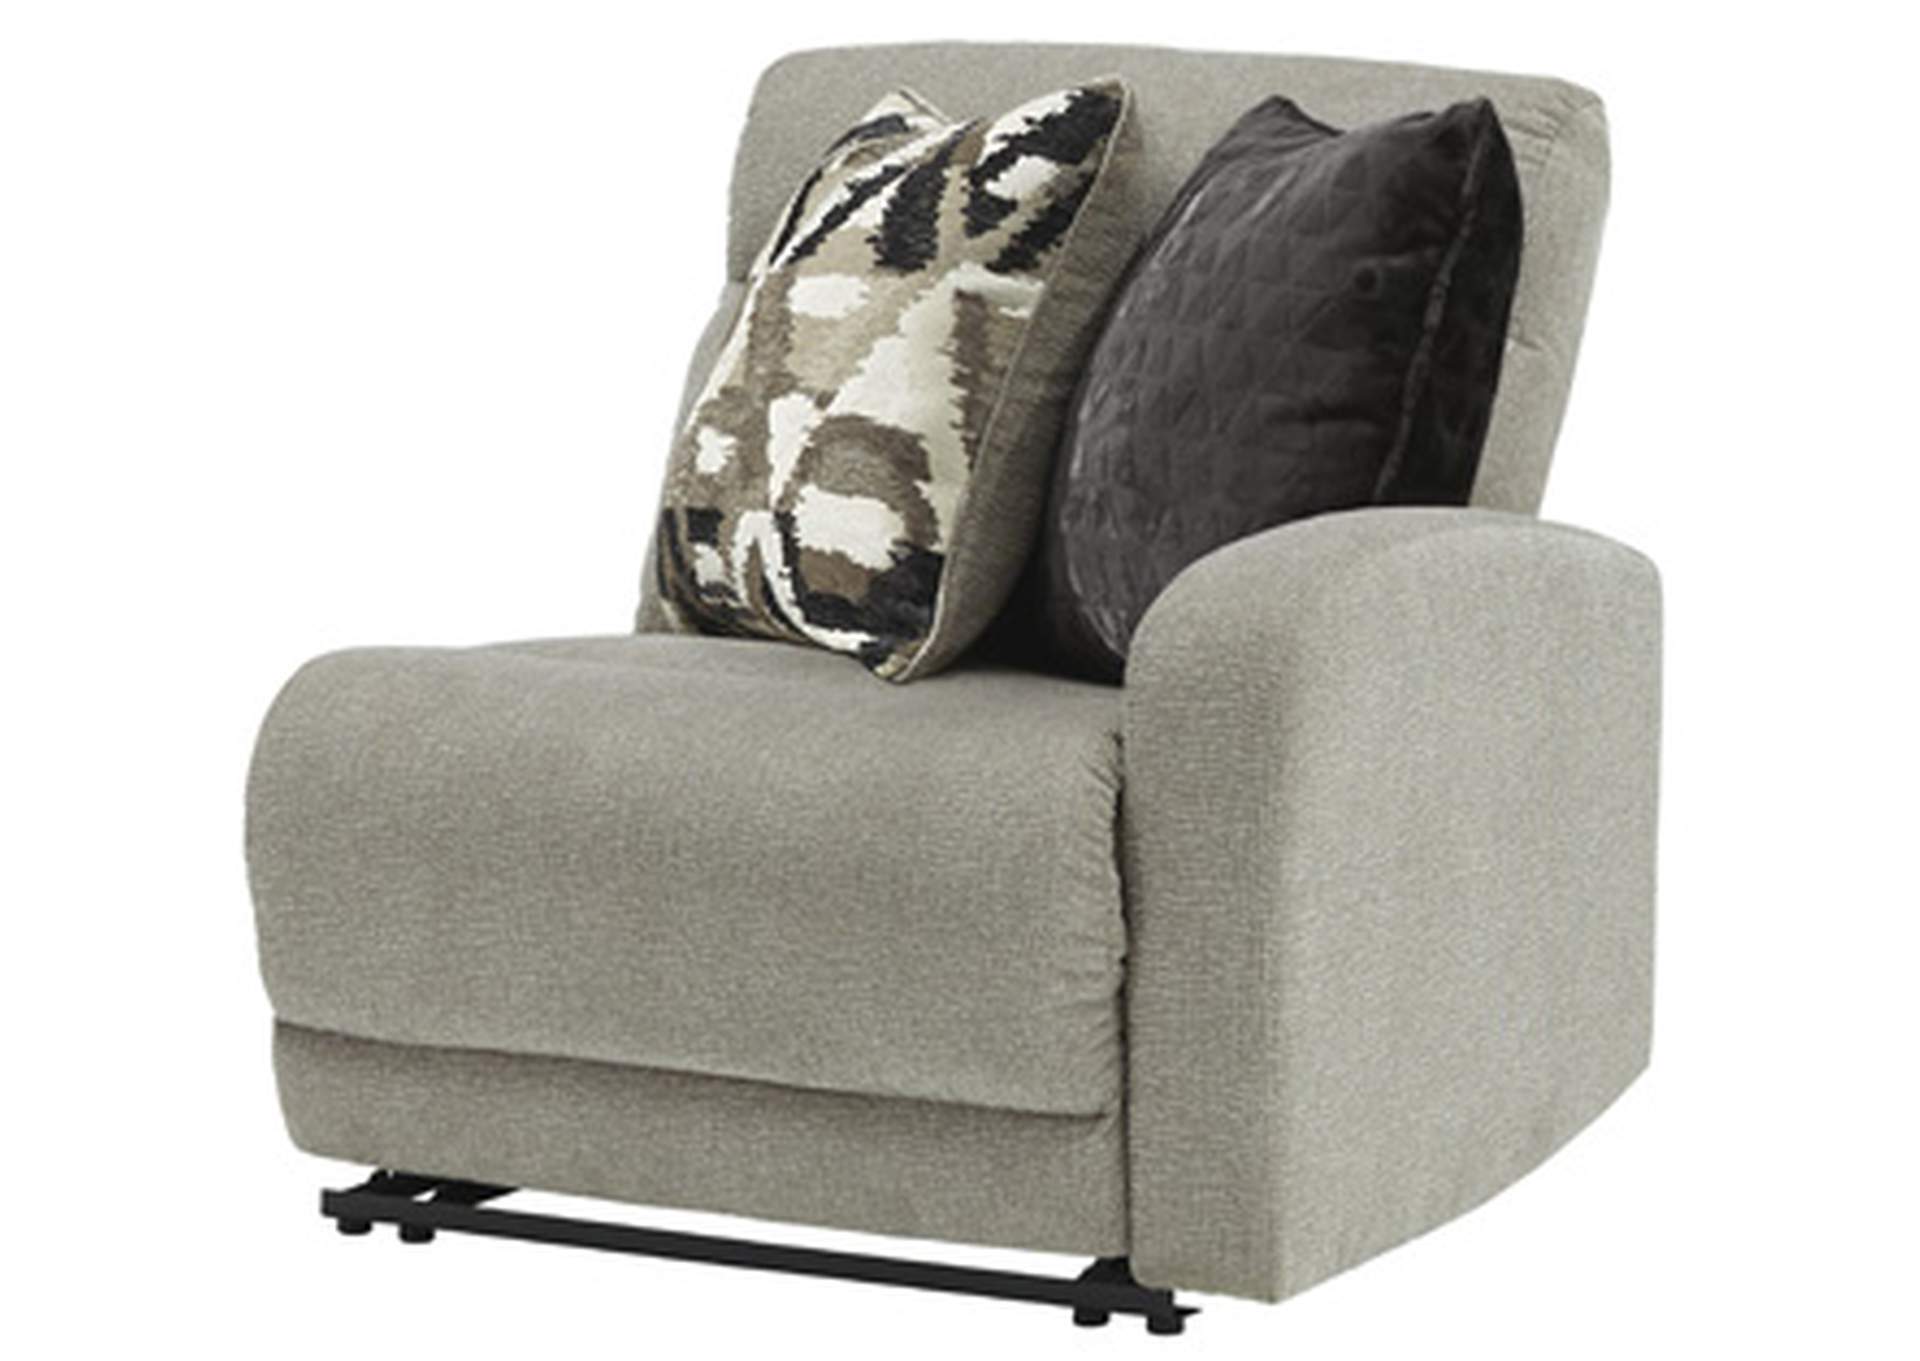 Colleyville Right-Arm Facing Power Recliner,Signature Design By Ashley